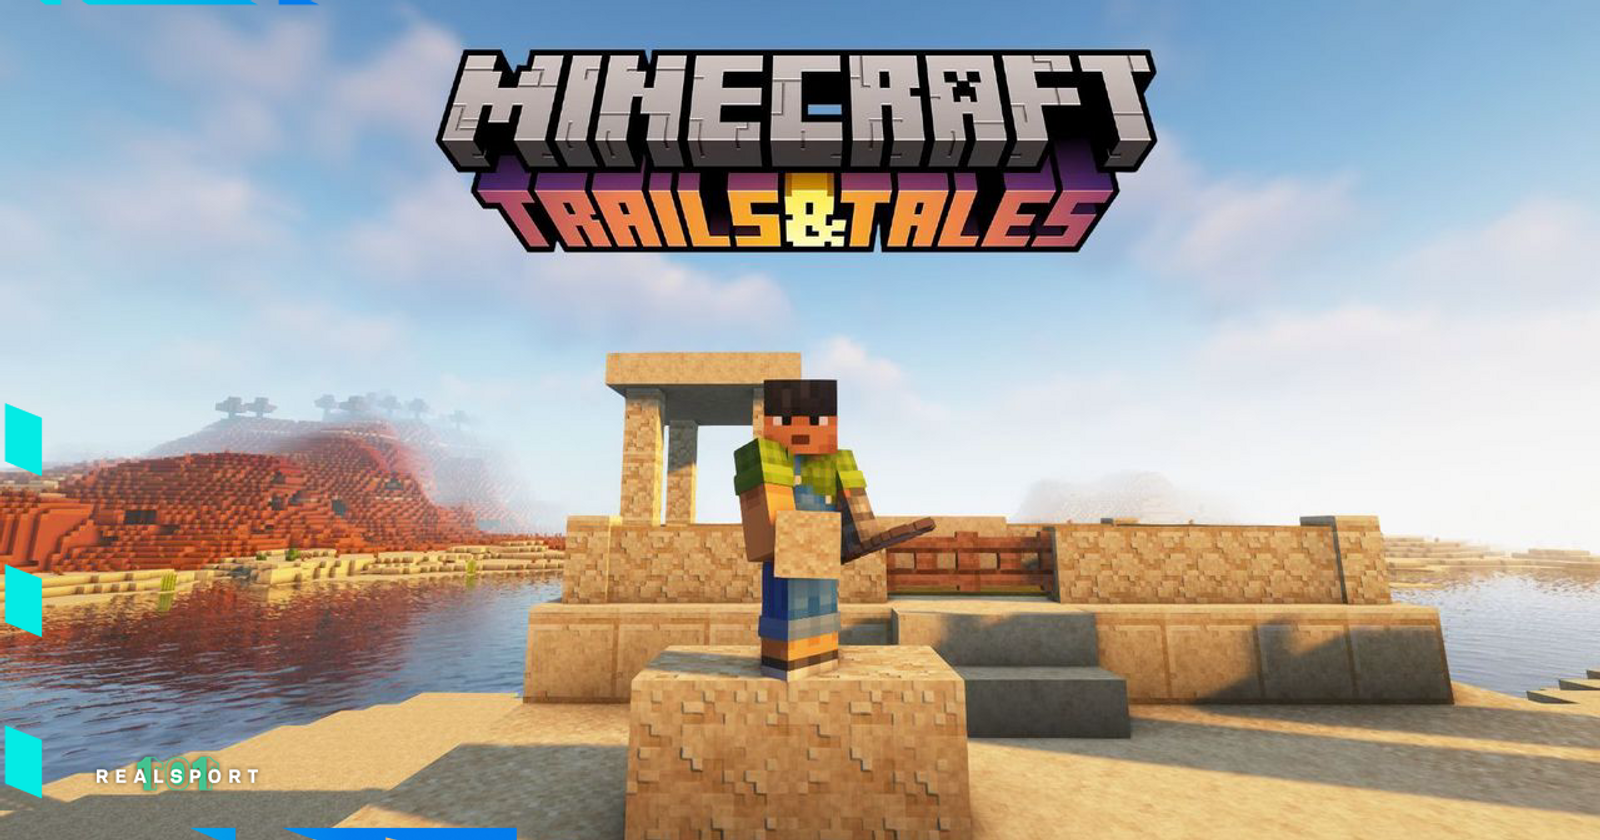 Download Minecraft 1.20 for free on Android: The Trails and Tales Update